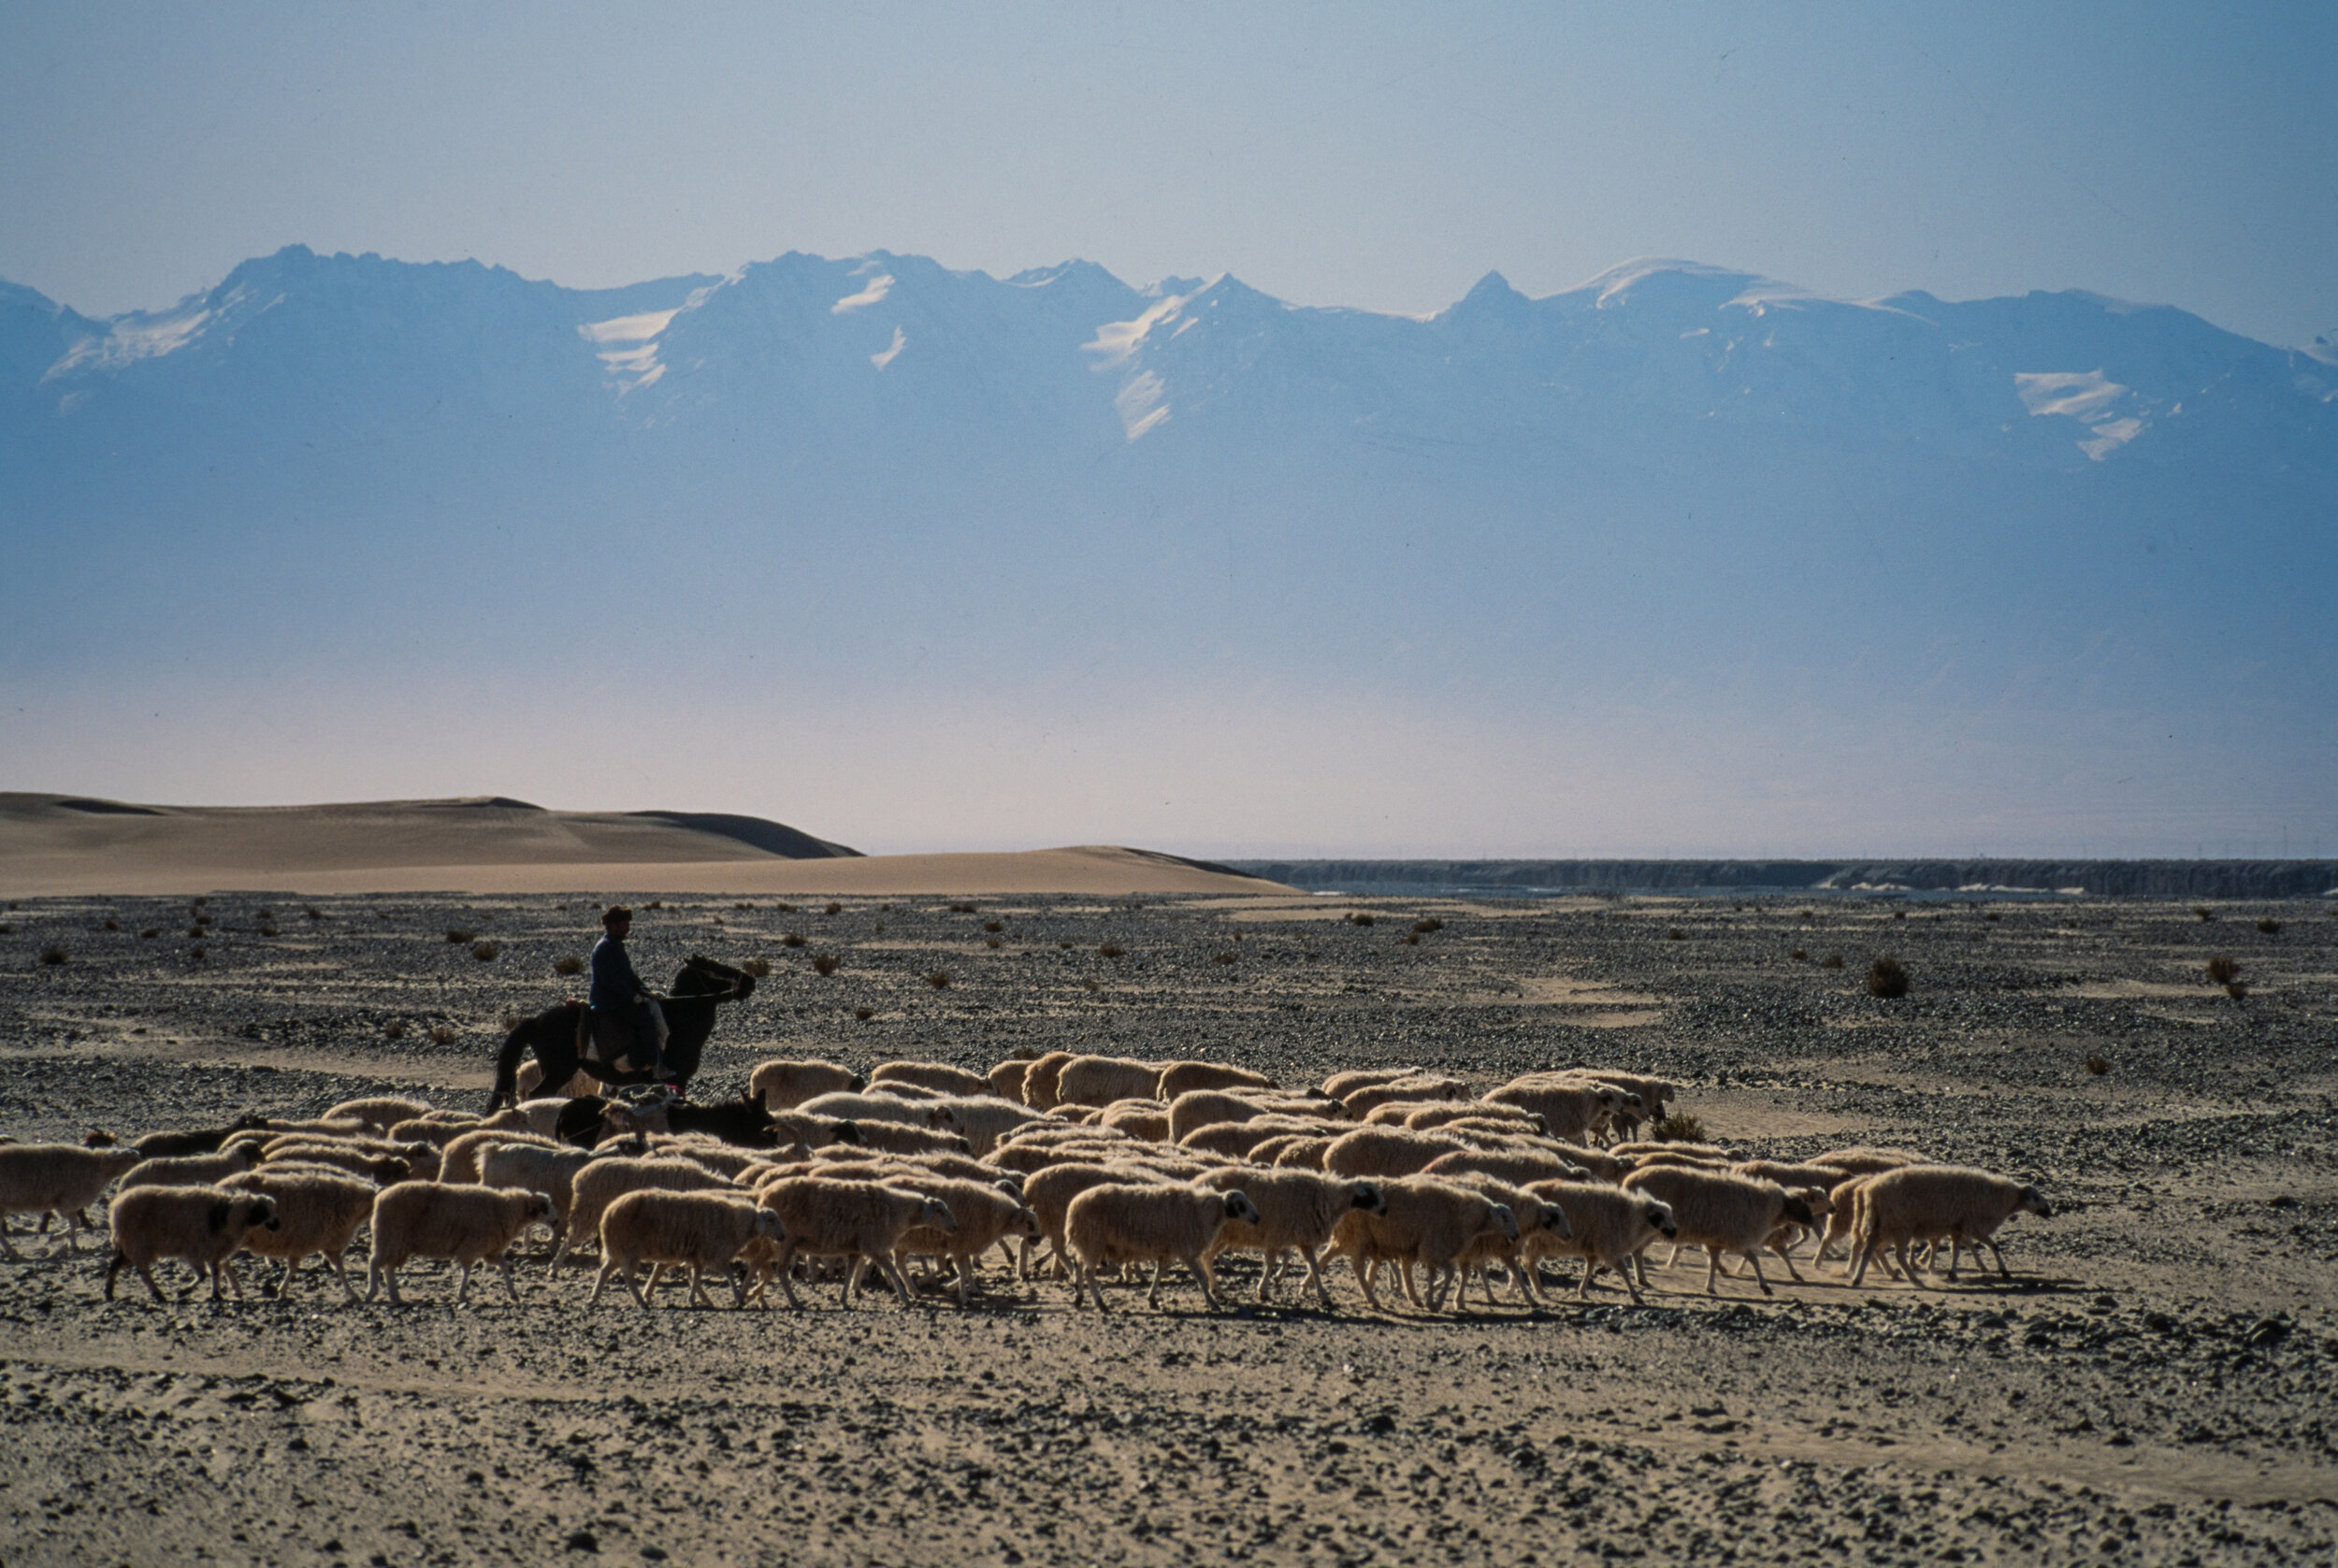  Along the Southern Silk Road a shepherd tends his flock. The Kun Lun Mountains are in the distance with Tibet on the other side of them.  